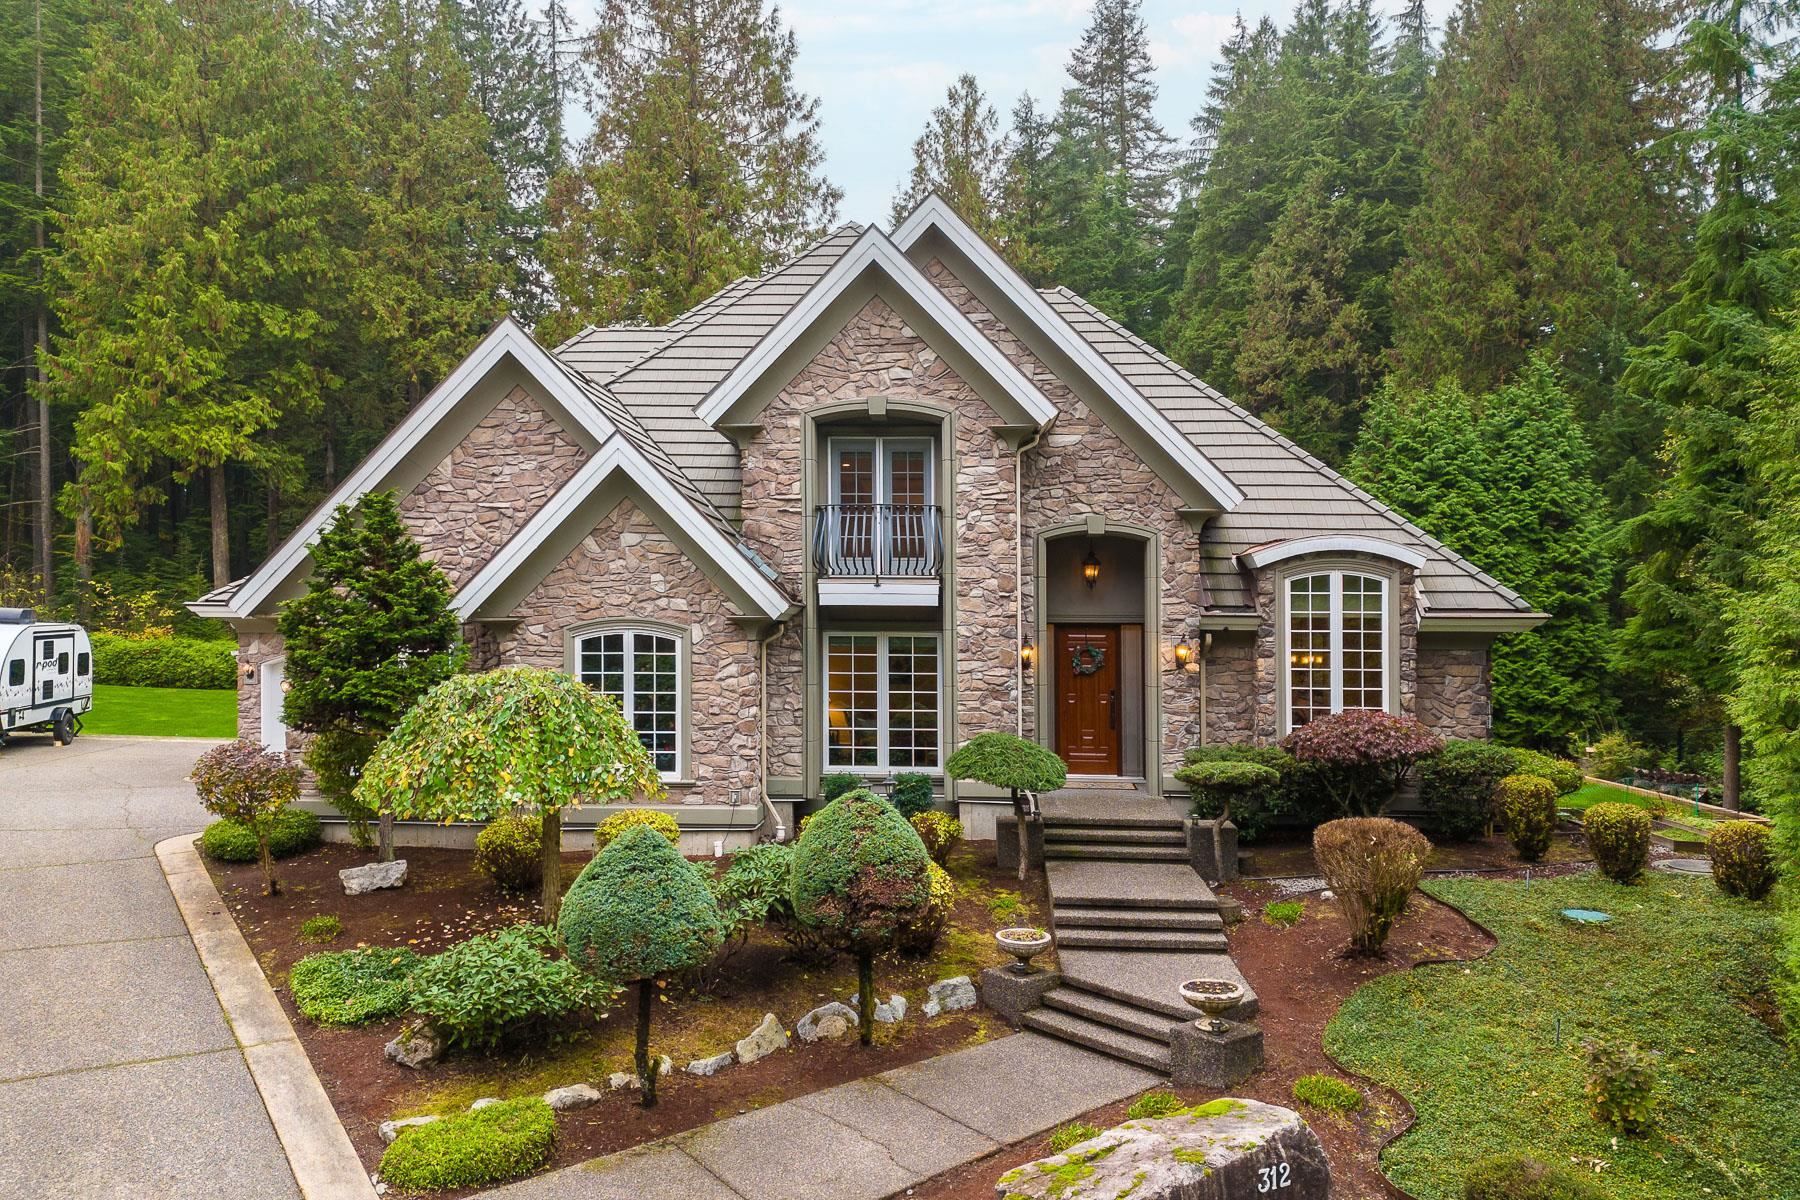 New property listed in Anmore, Port Moody